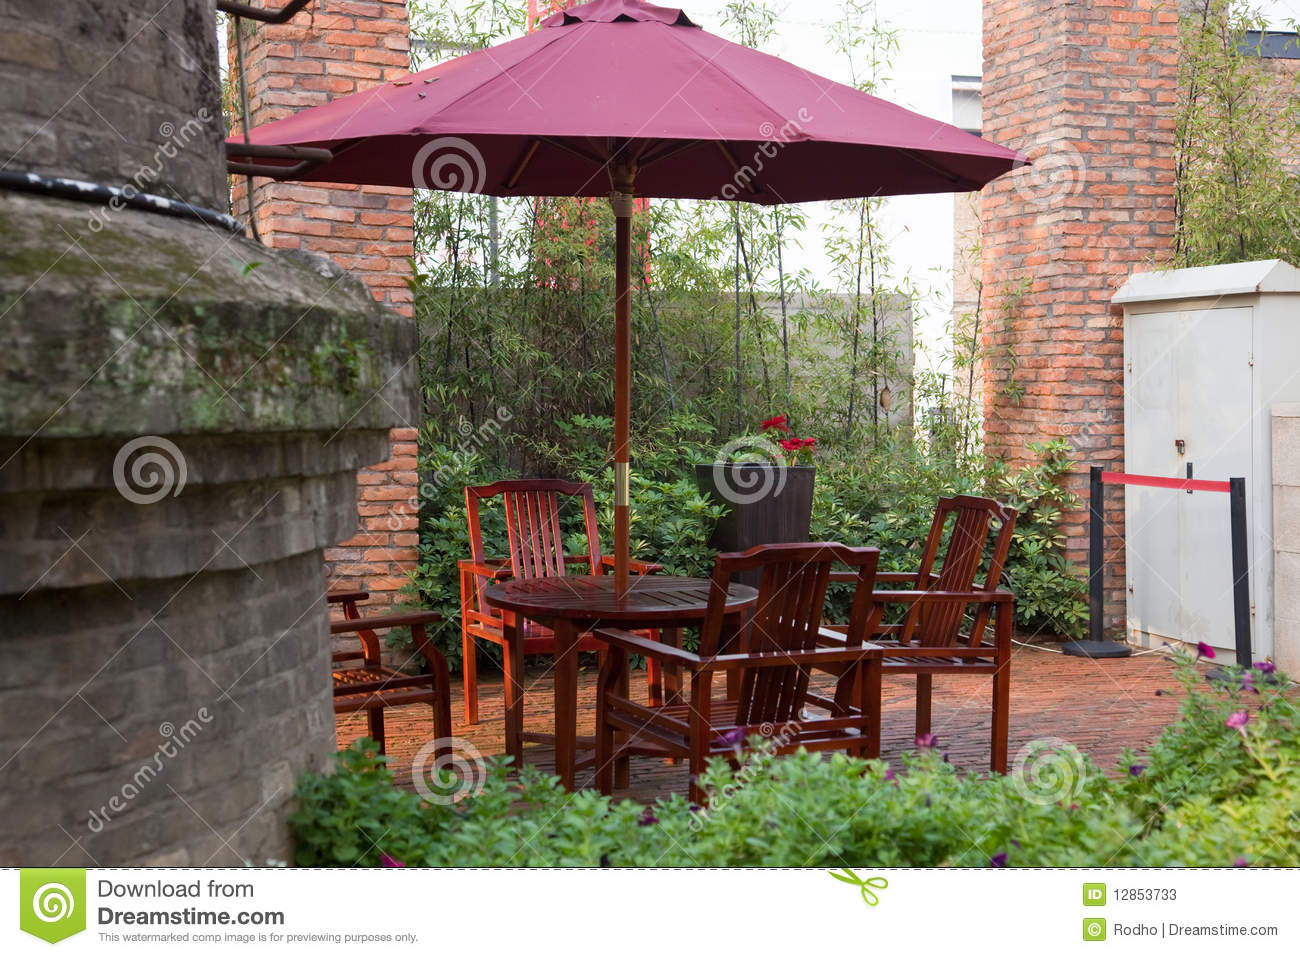 Summer Patio With Tables And Wooden Chairs Under Umbrella In Garden 